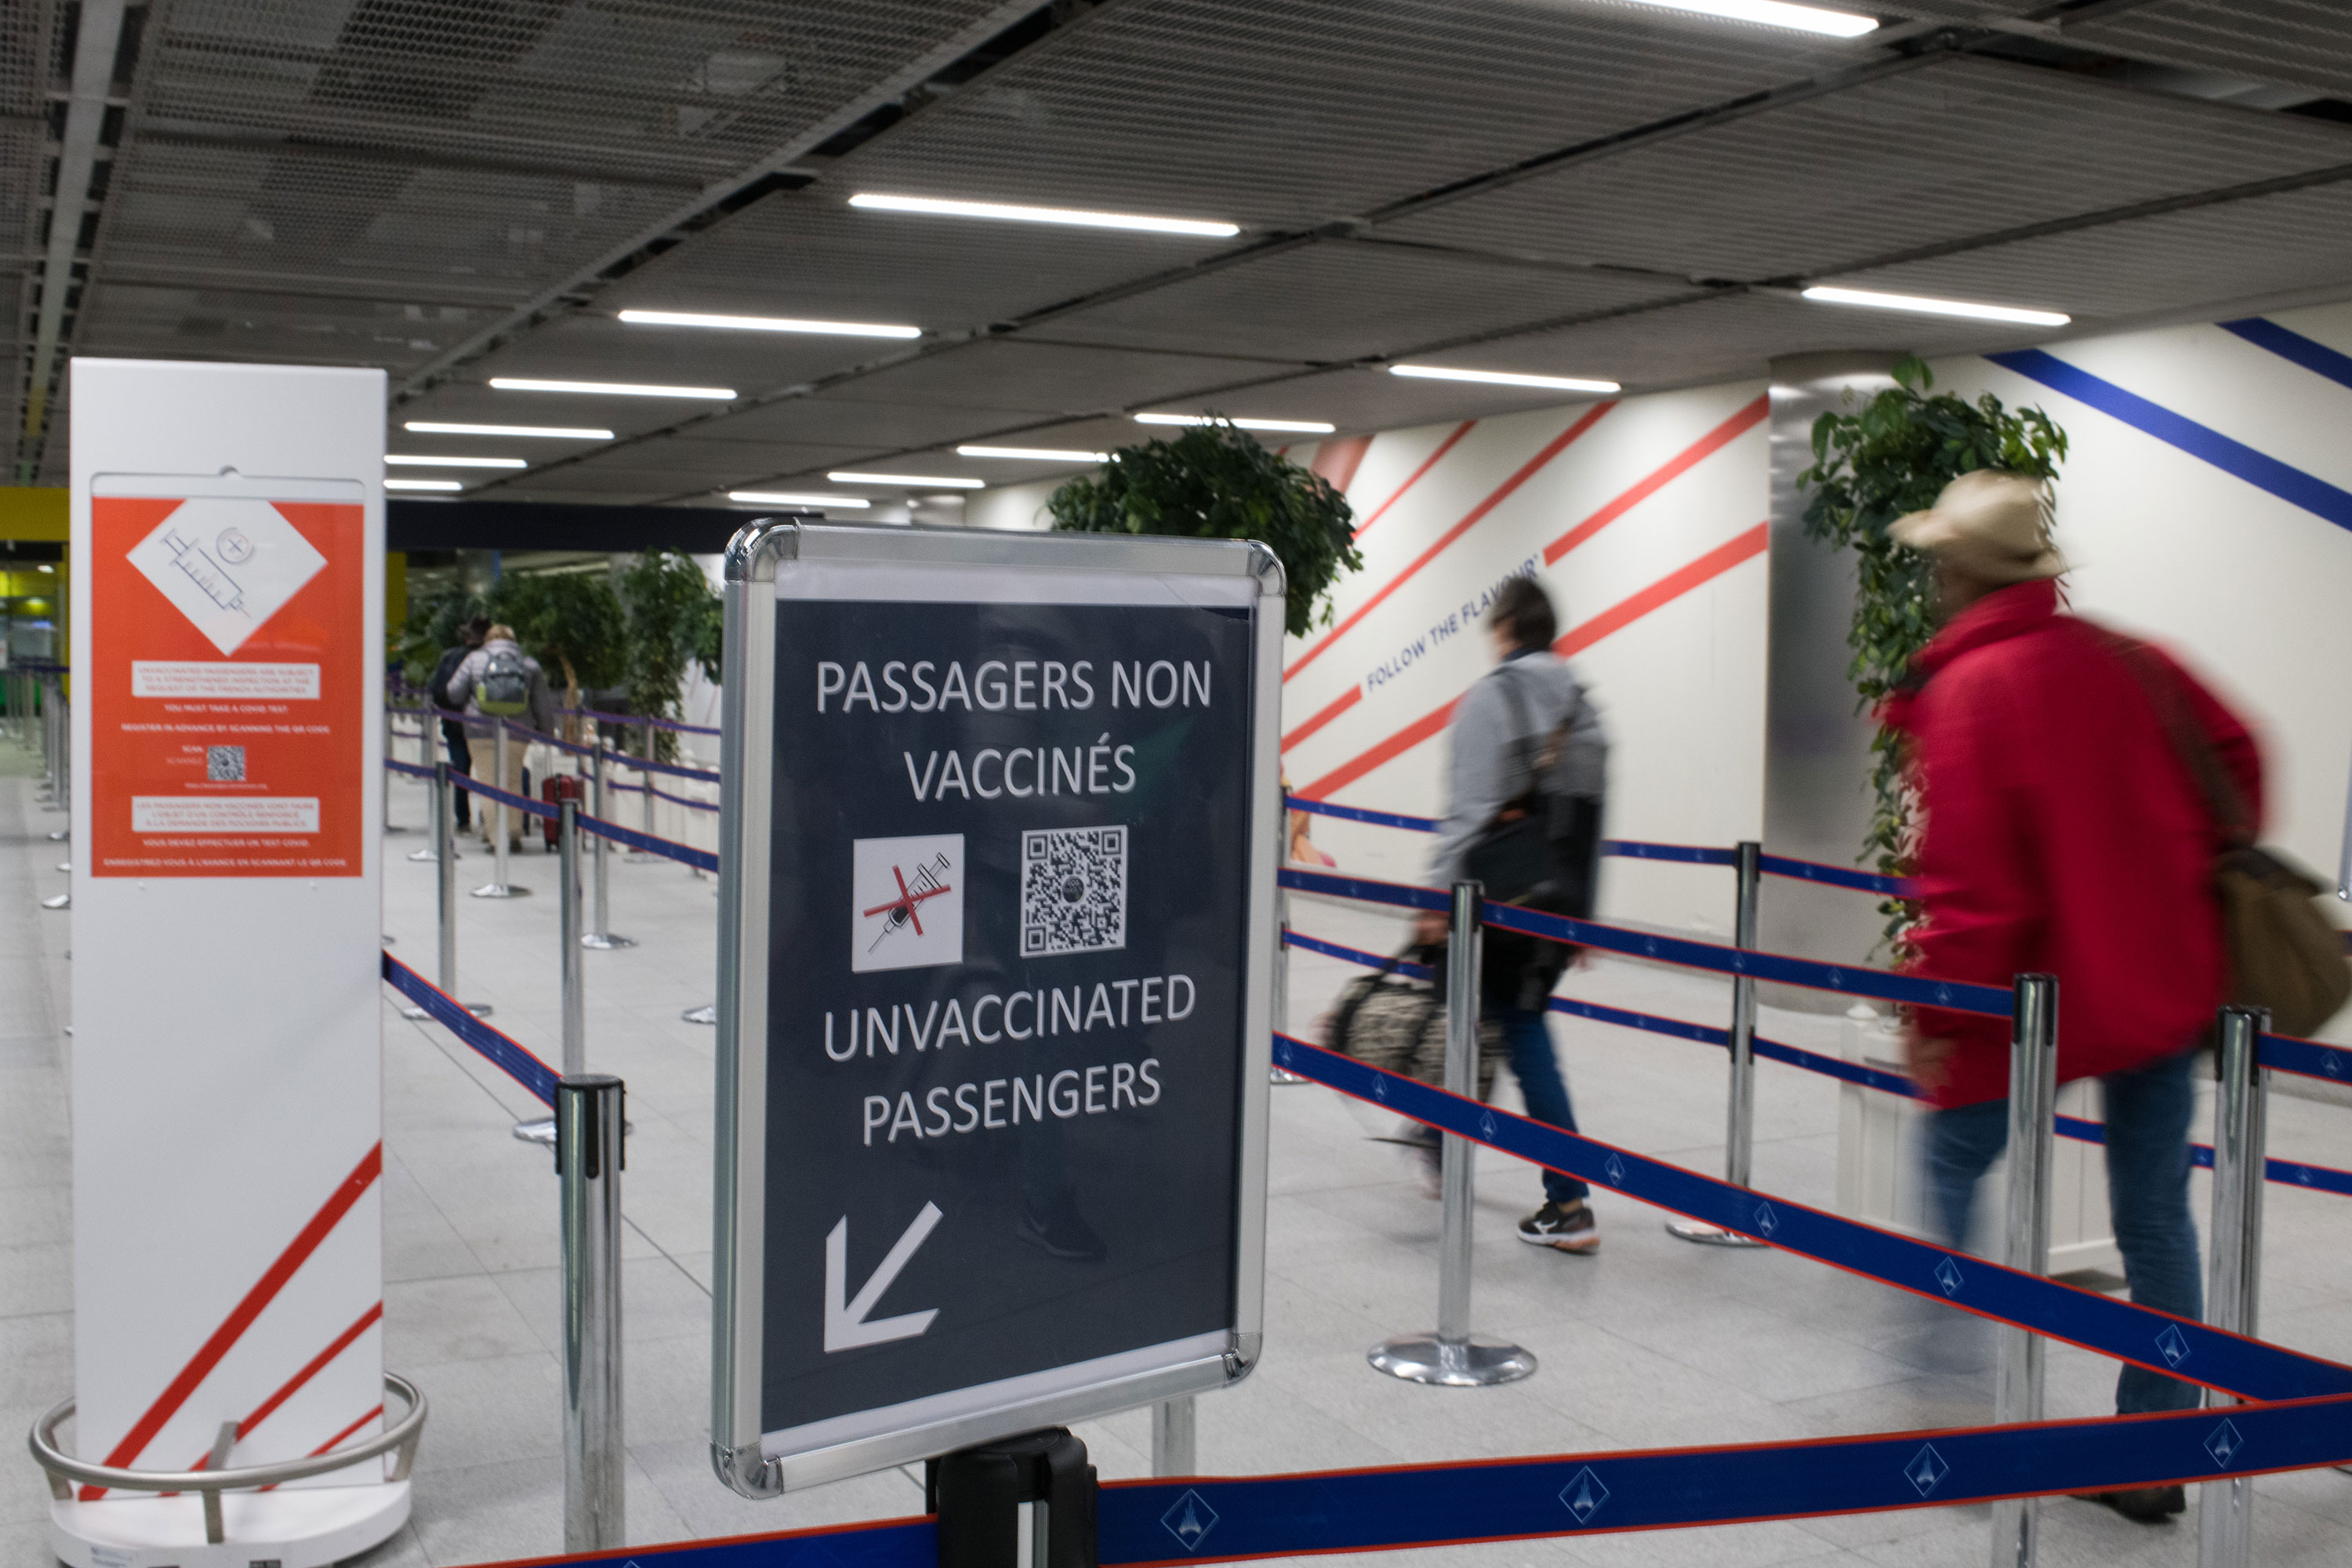 Visitors walk past a sign for unvaccinated passengers at Charles de Gaulle airport in Paris on December 14.